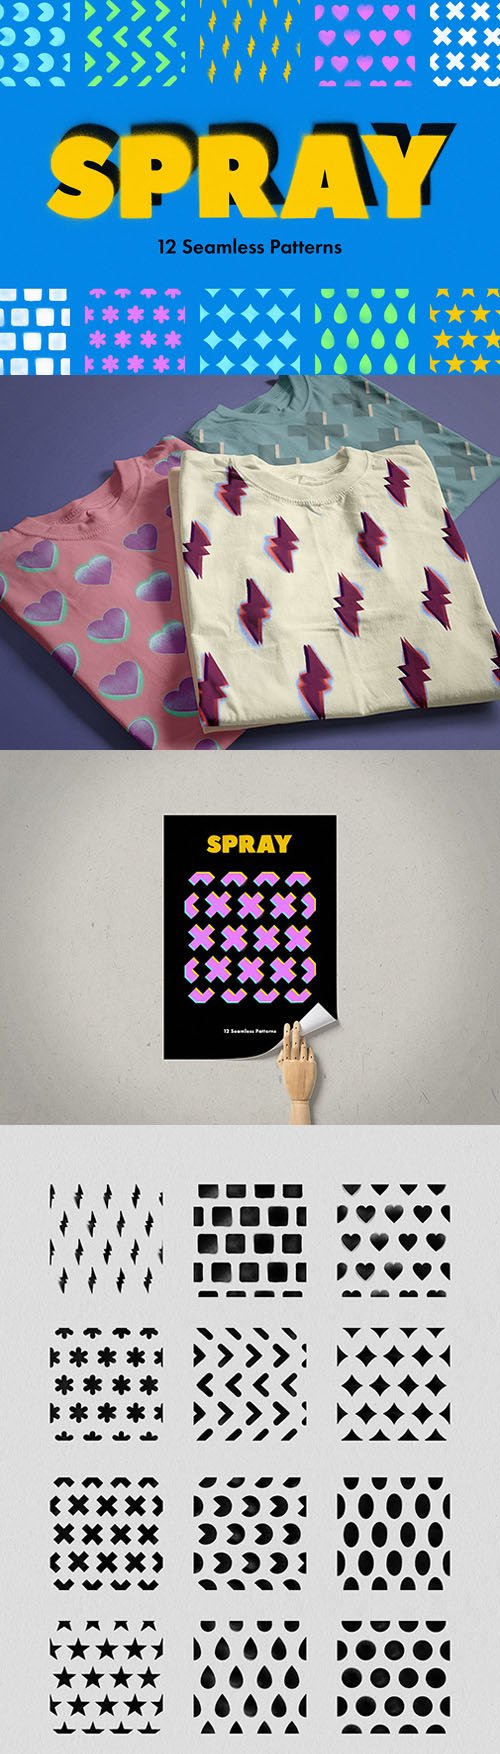 Spray - 12 Seamless Patterns in [PSD/PNG]